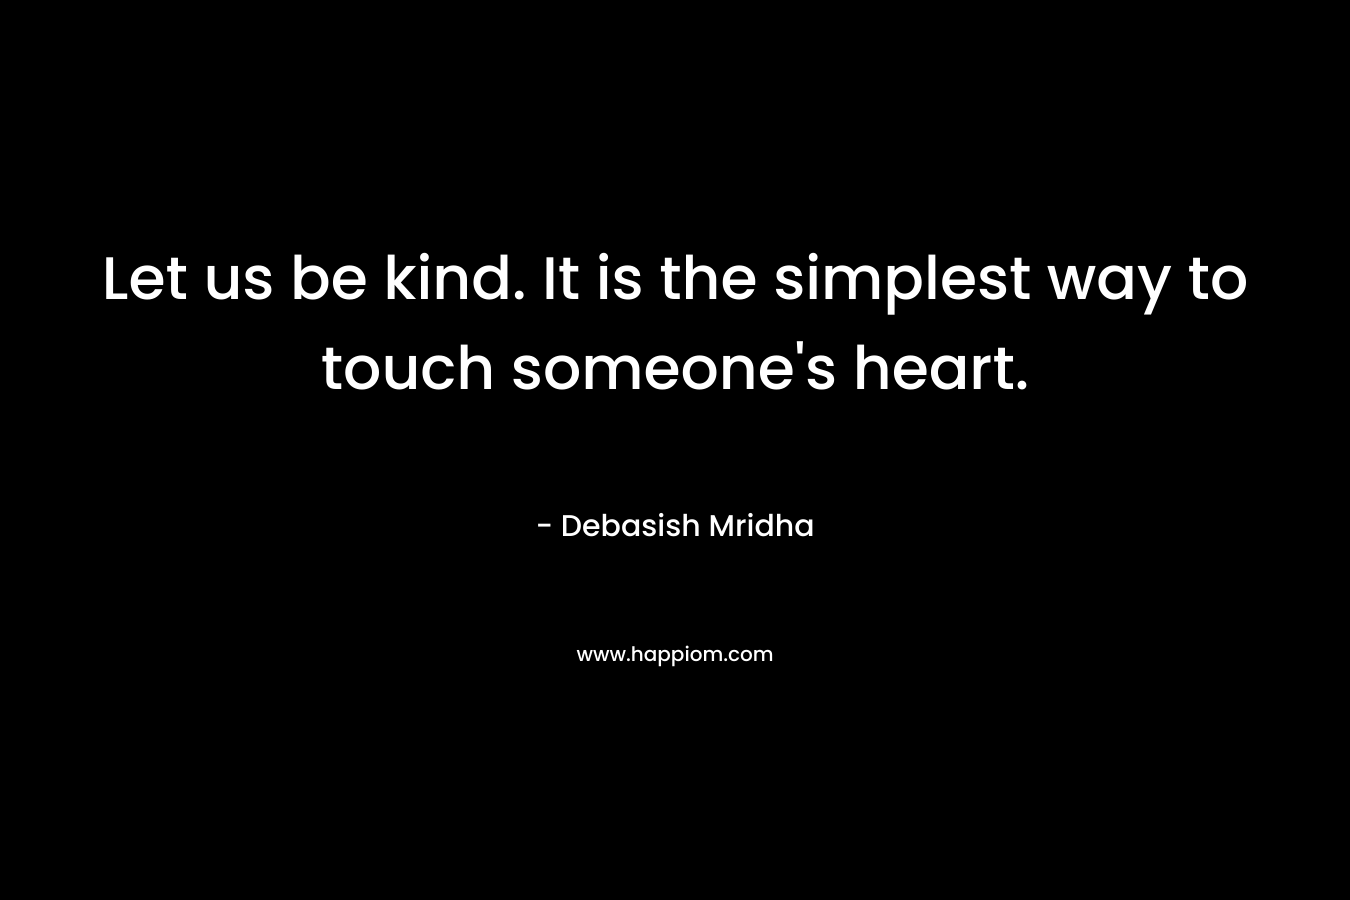 Let us be kind. It is the simplest way to touch someone's heart.